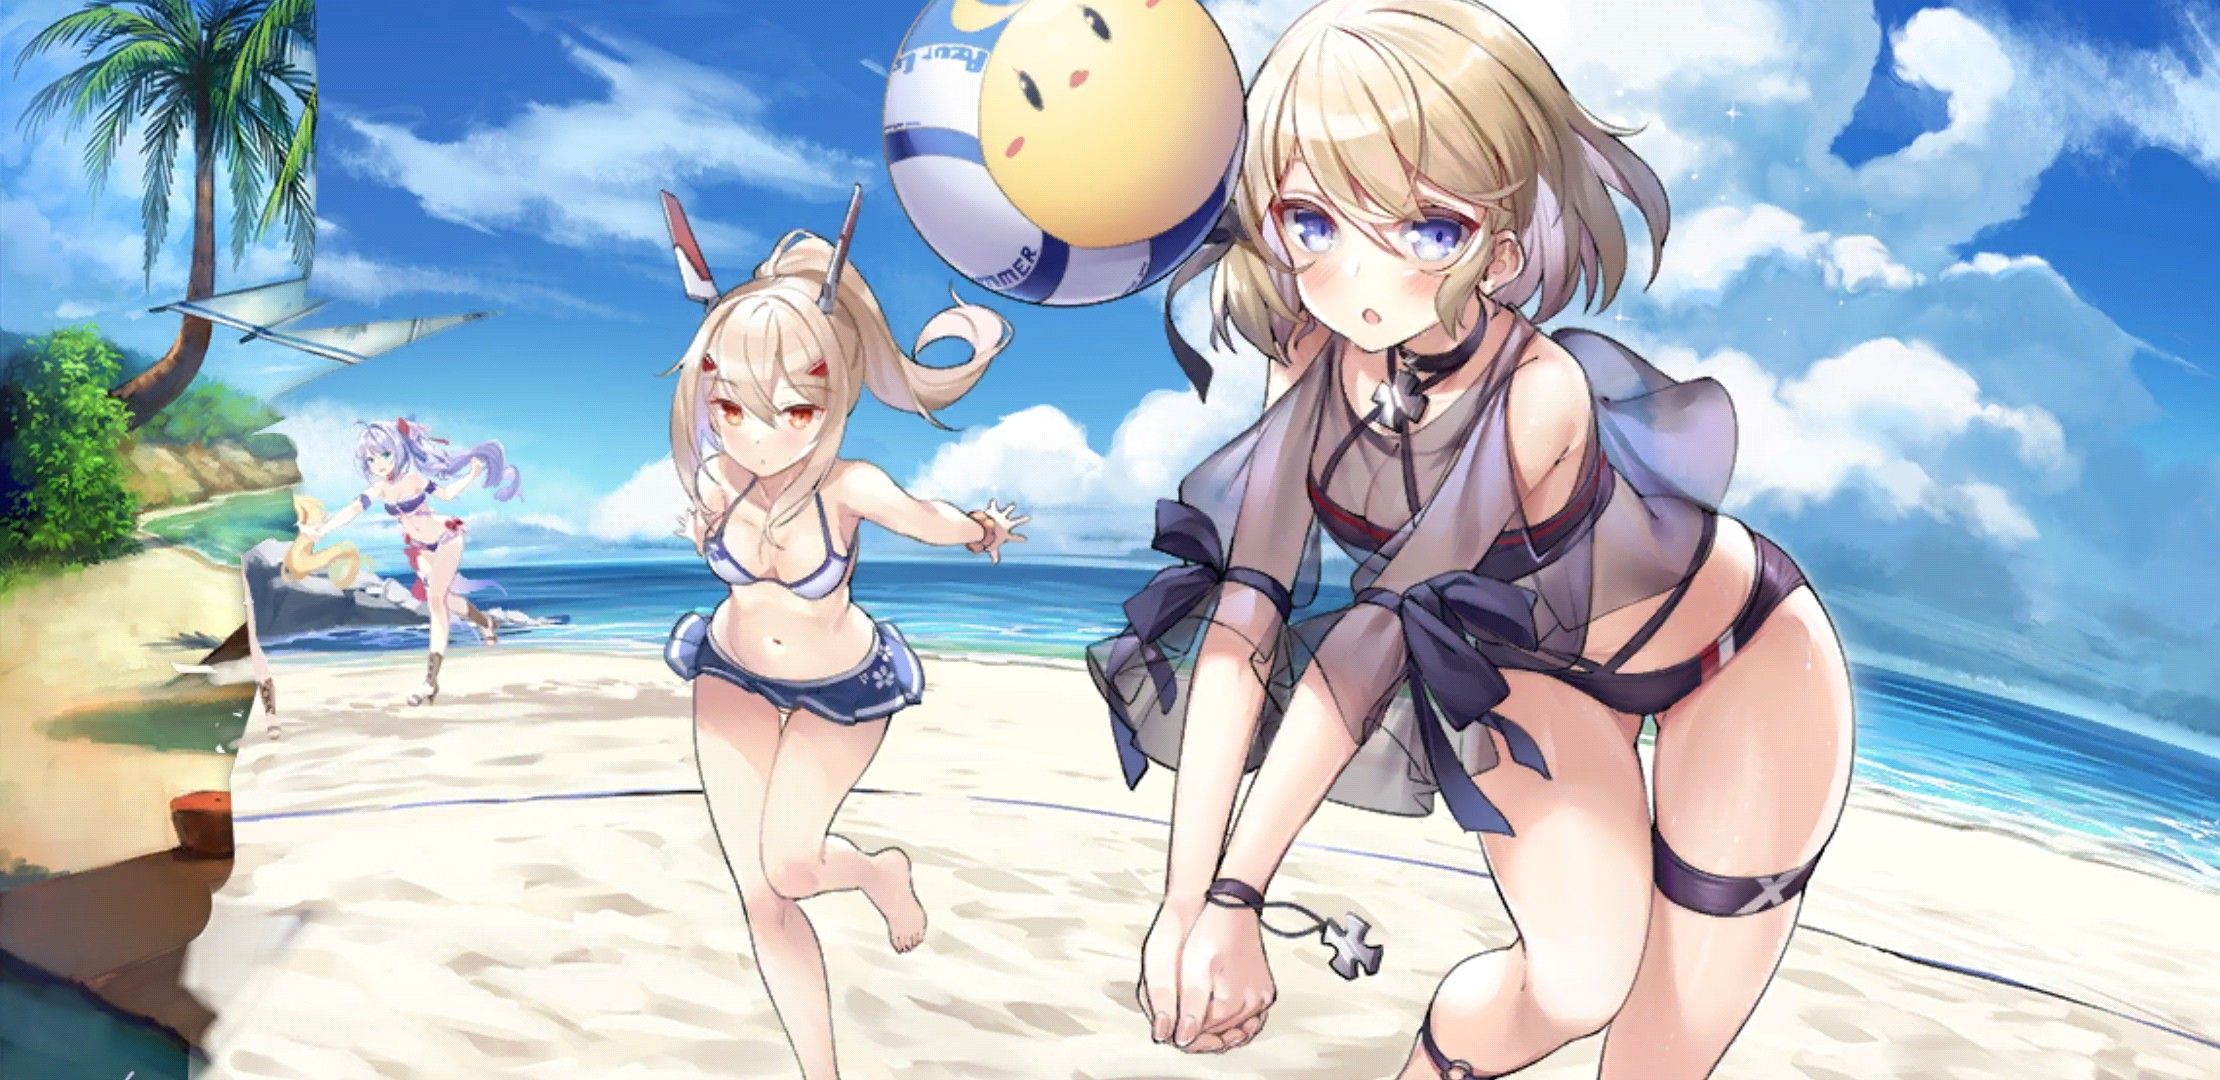 【There is an image】 Smartphone that urges charging with erotic swimsuits is malicious 23